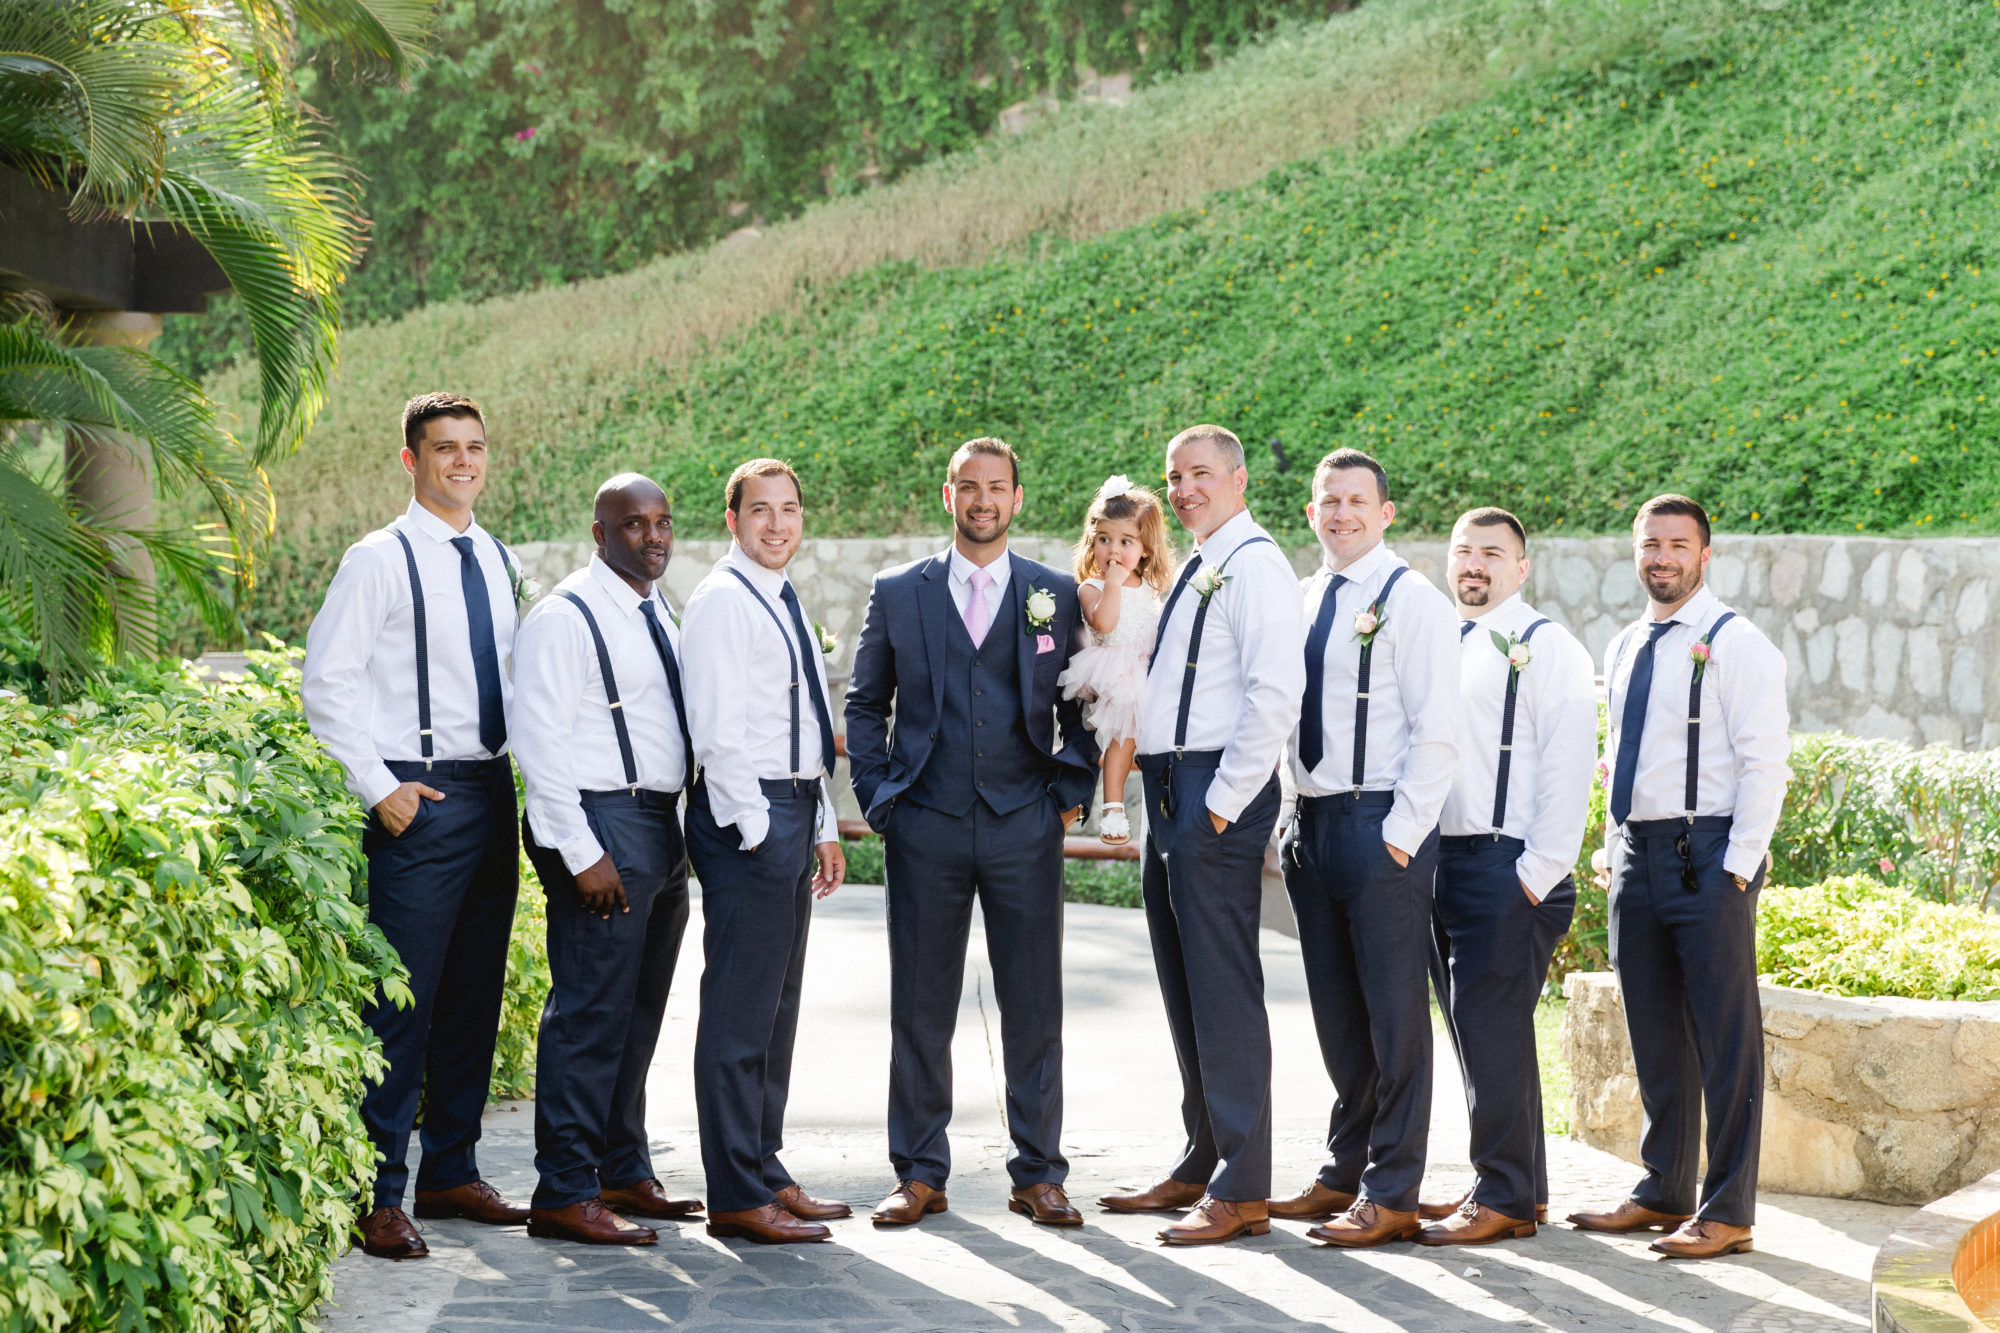 Groomsmen wearing tailor-made suits at a wedding